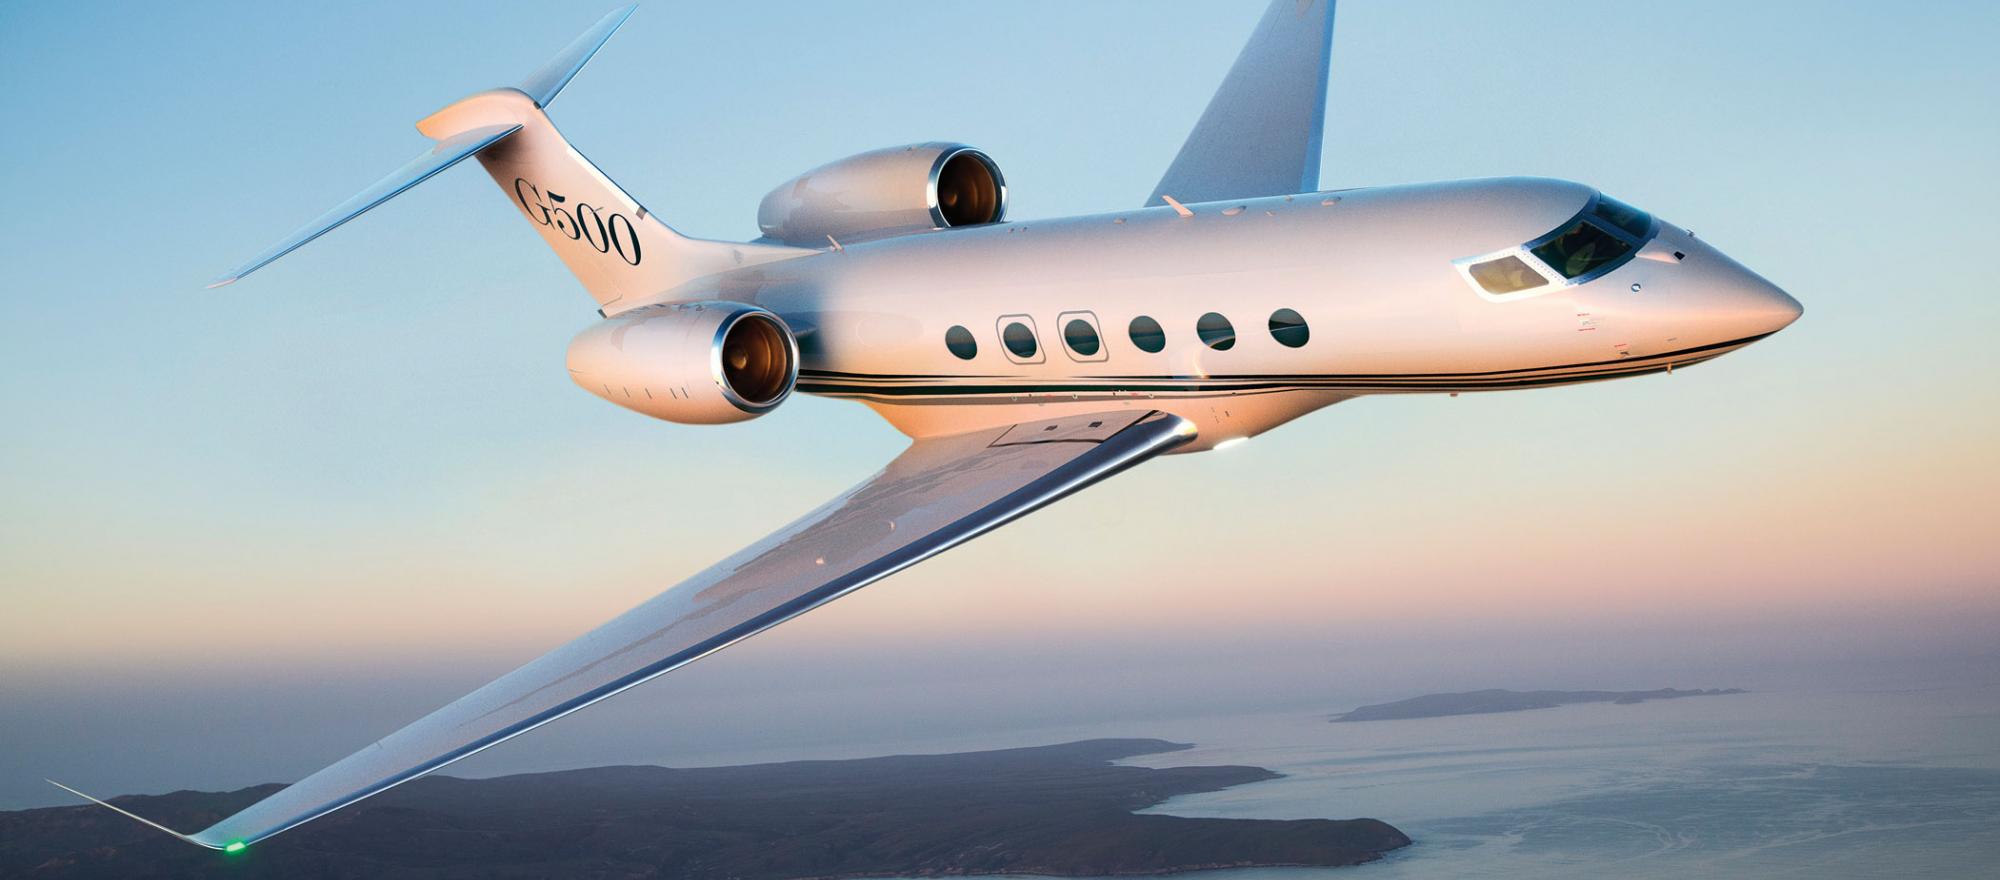 Gulfstream’s G500, which made its first test flight last May, will be capable of traveling nonstop from Los Angeles to London.